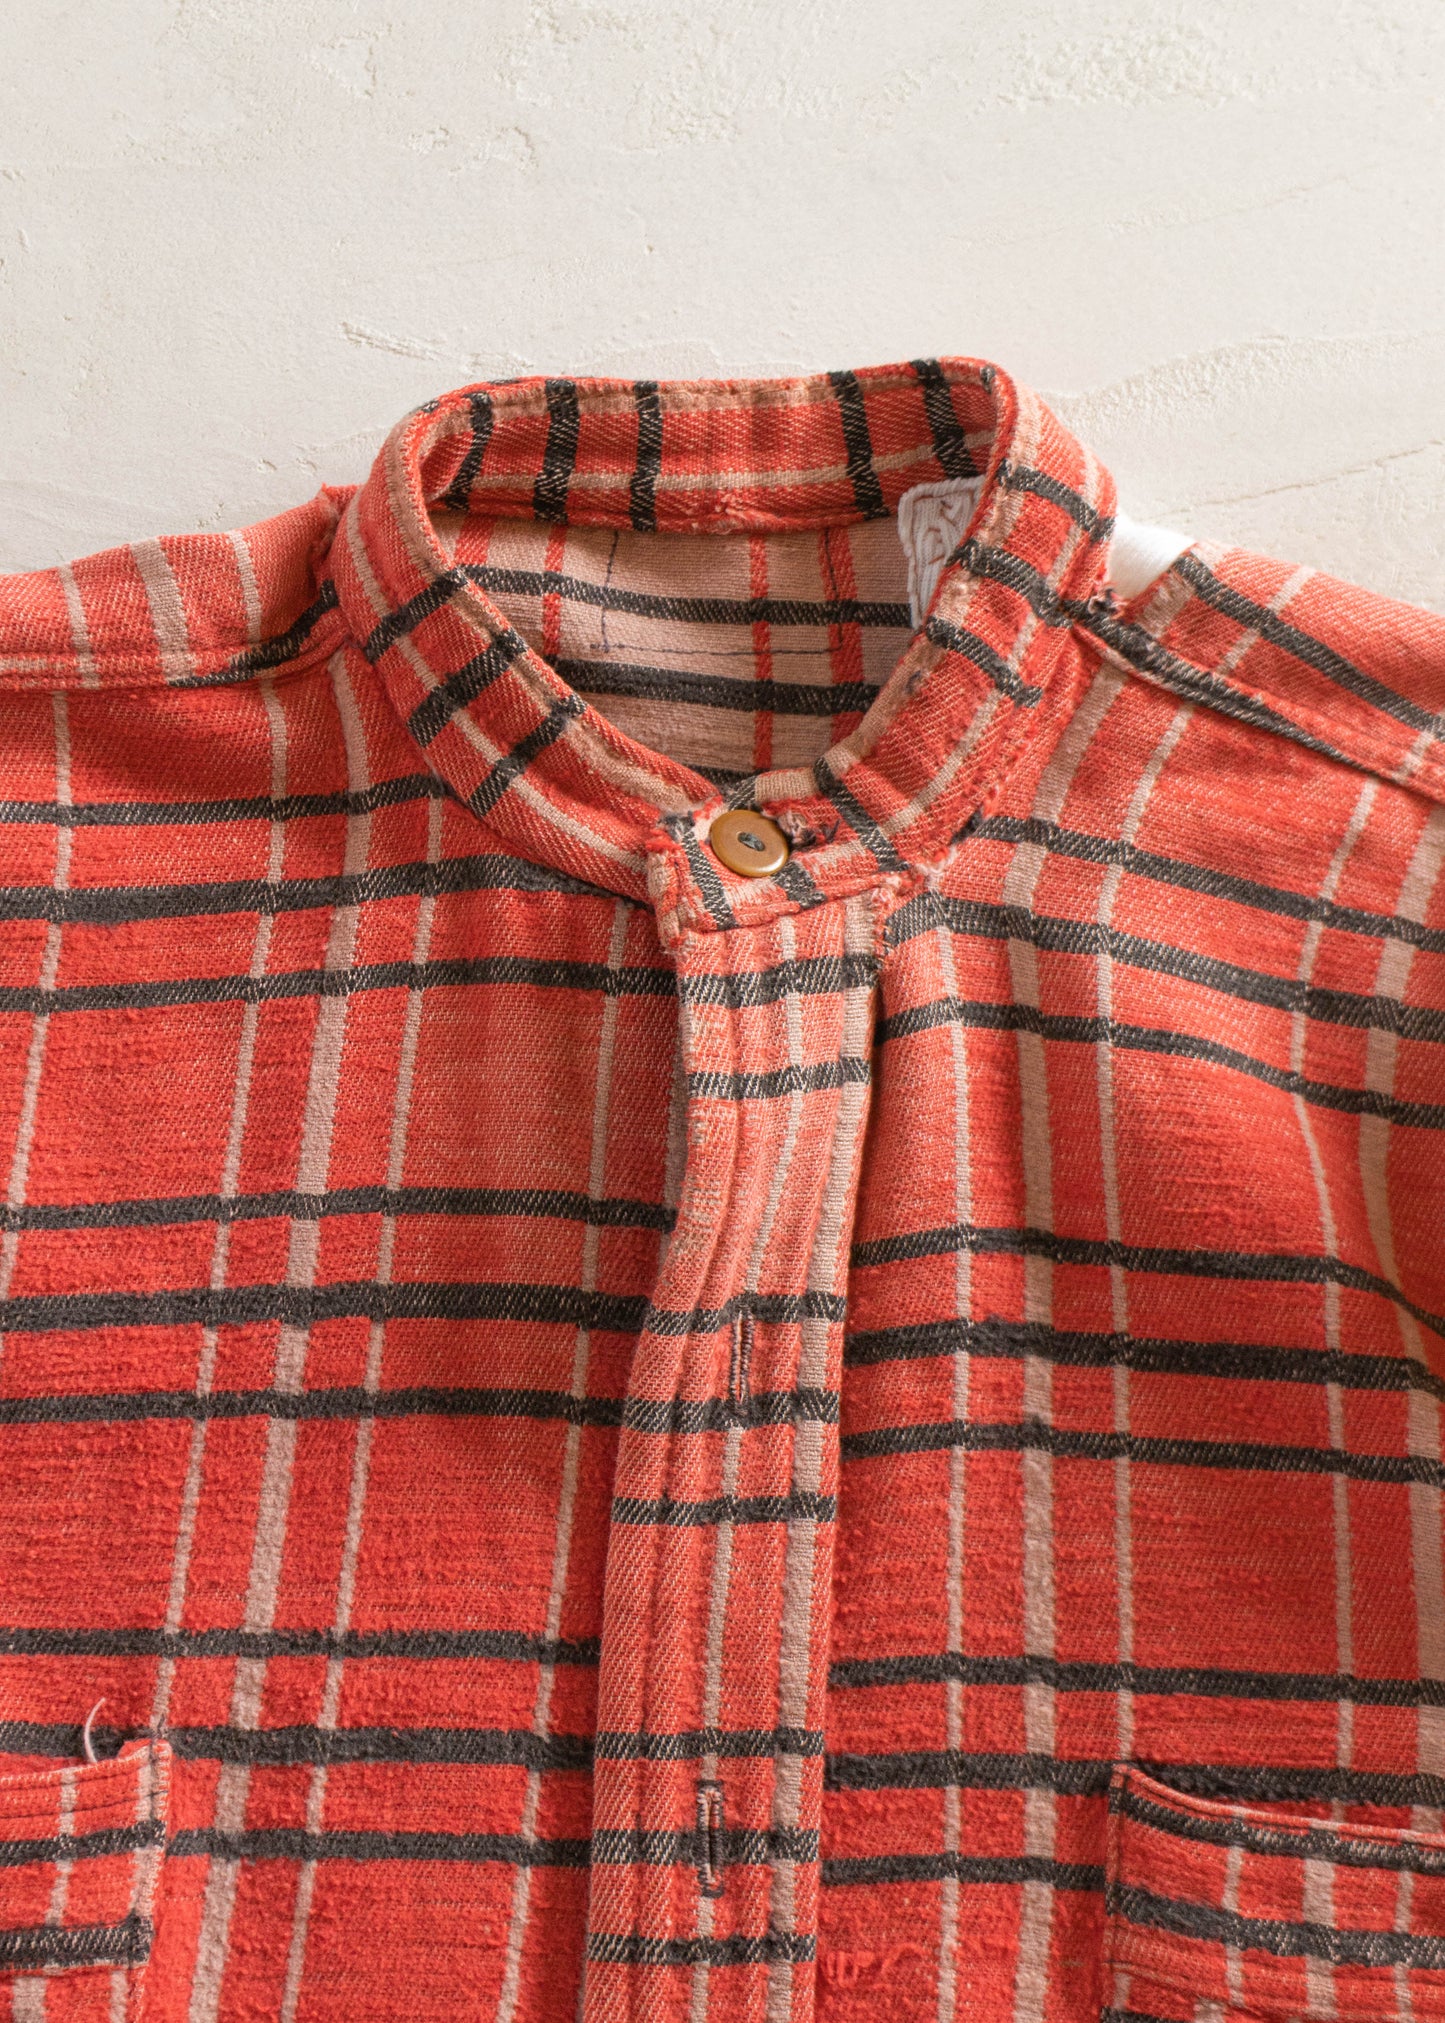 1950s Camp Blanket Flannel Button Up Shirt Size XS/S